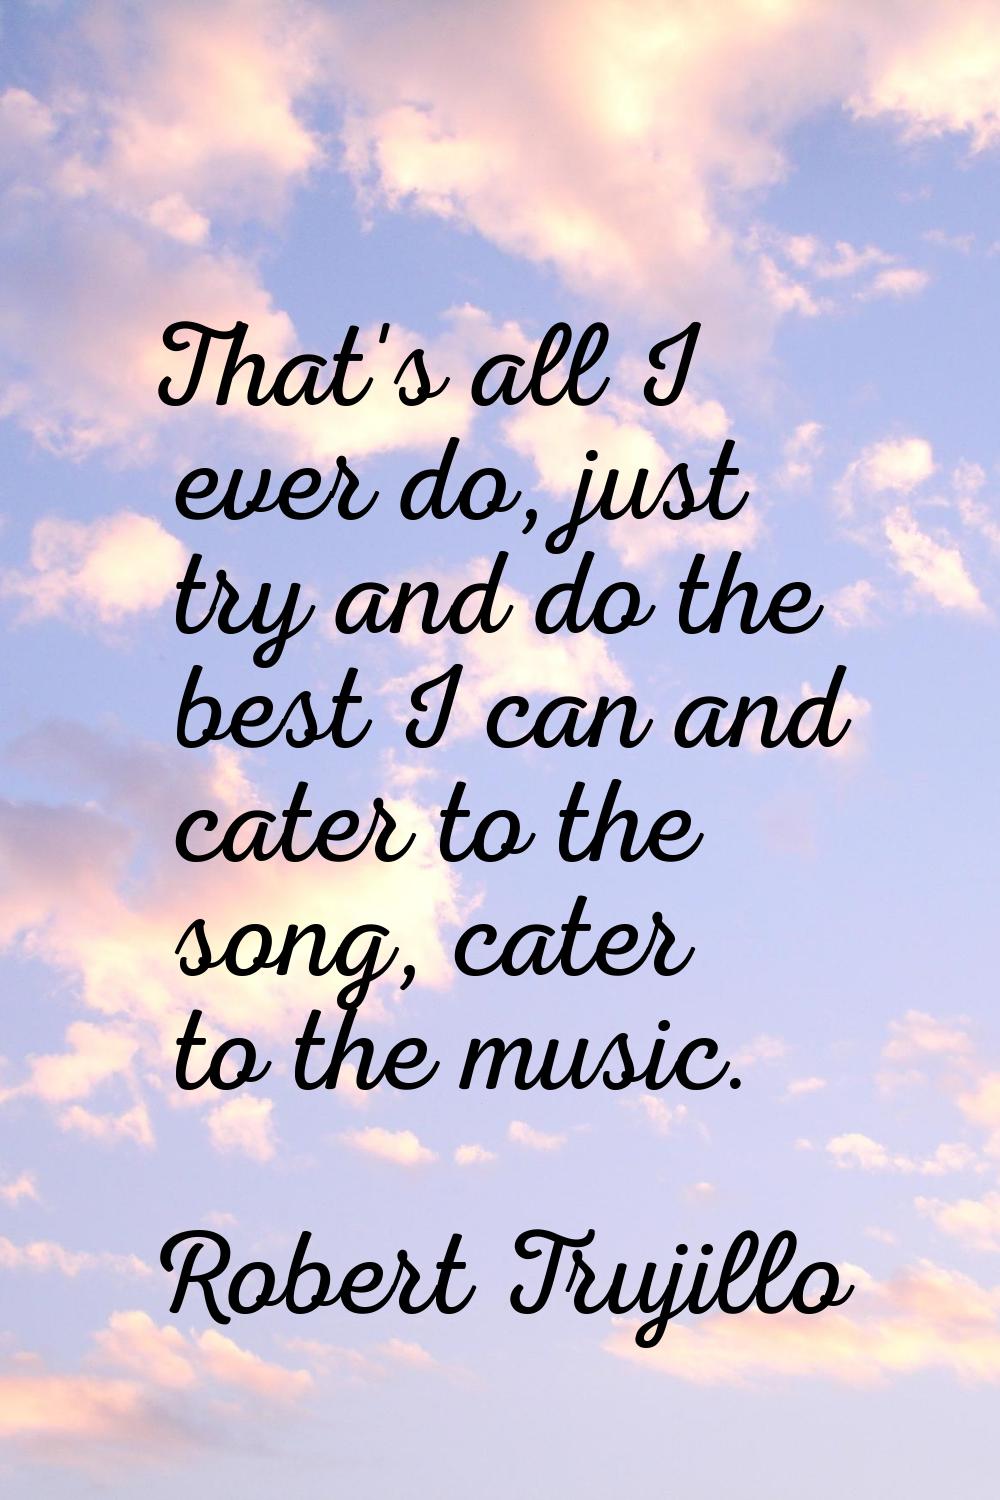 That's all I ever do, just try and do the best I can and cater to the song, cater to the music.